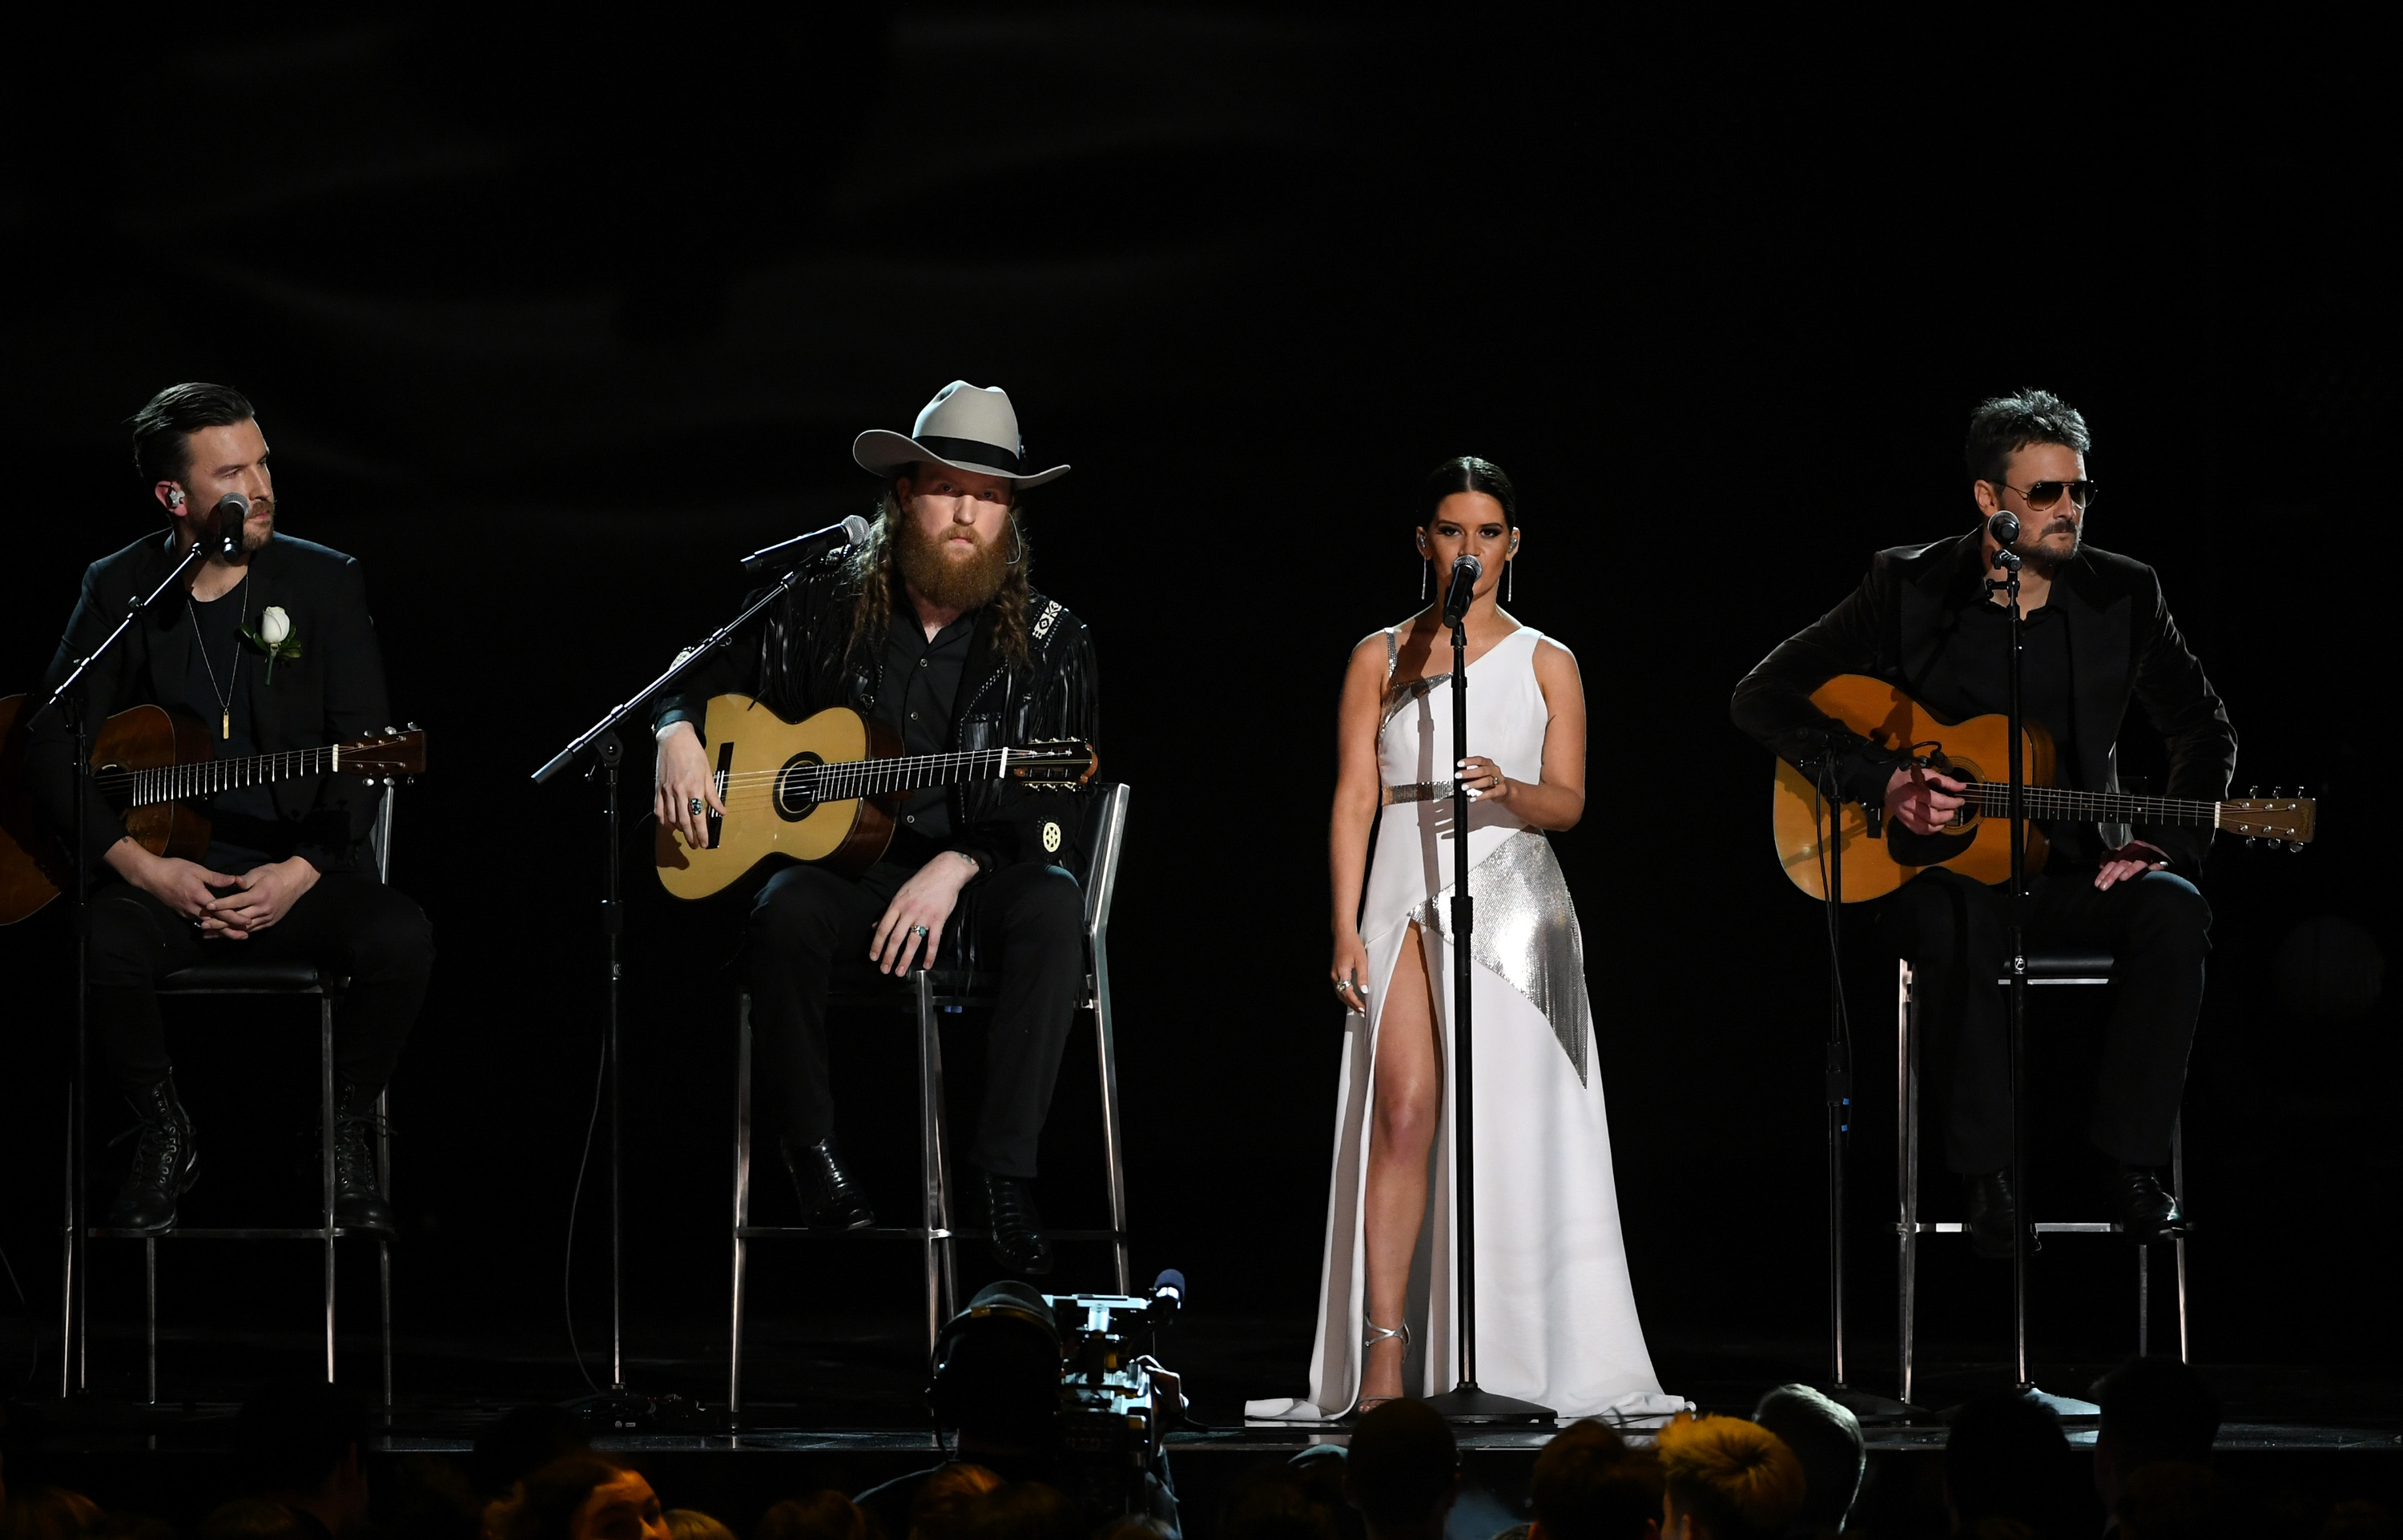 NEW YORK, NY - JANUARY 28:  (L-R) Recording artists T.J. Osborne, John Osborne, Maren Morris, and Eric Church perform onstage during the 60th Annual GRAMMY Awards at Madison Square Garden on January 28, 2018 in New York City. (Kevin Winter&mdash;Getty Images for NARAS)